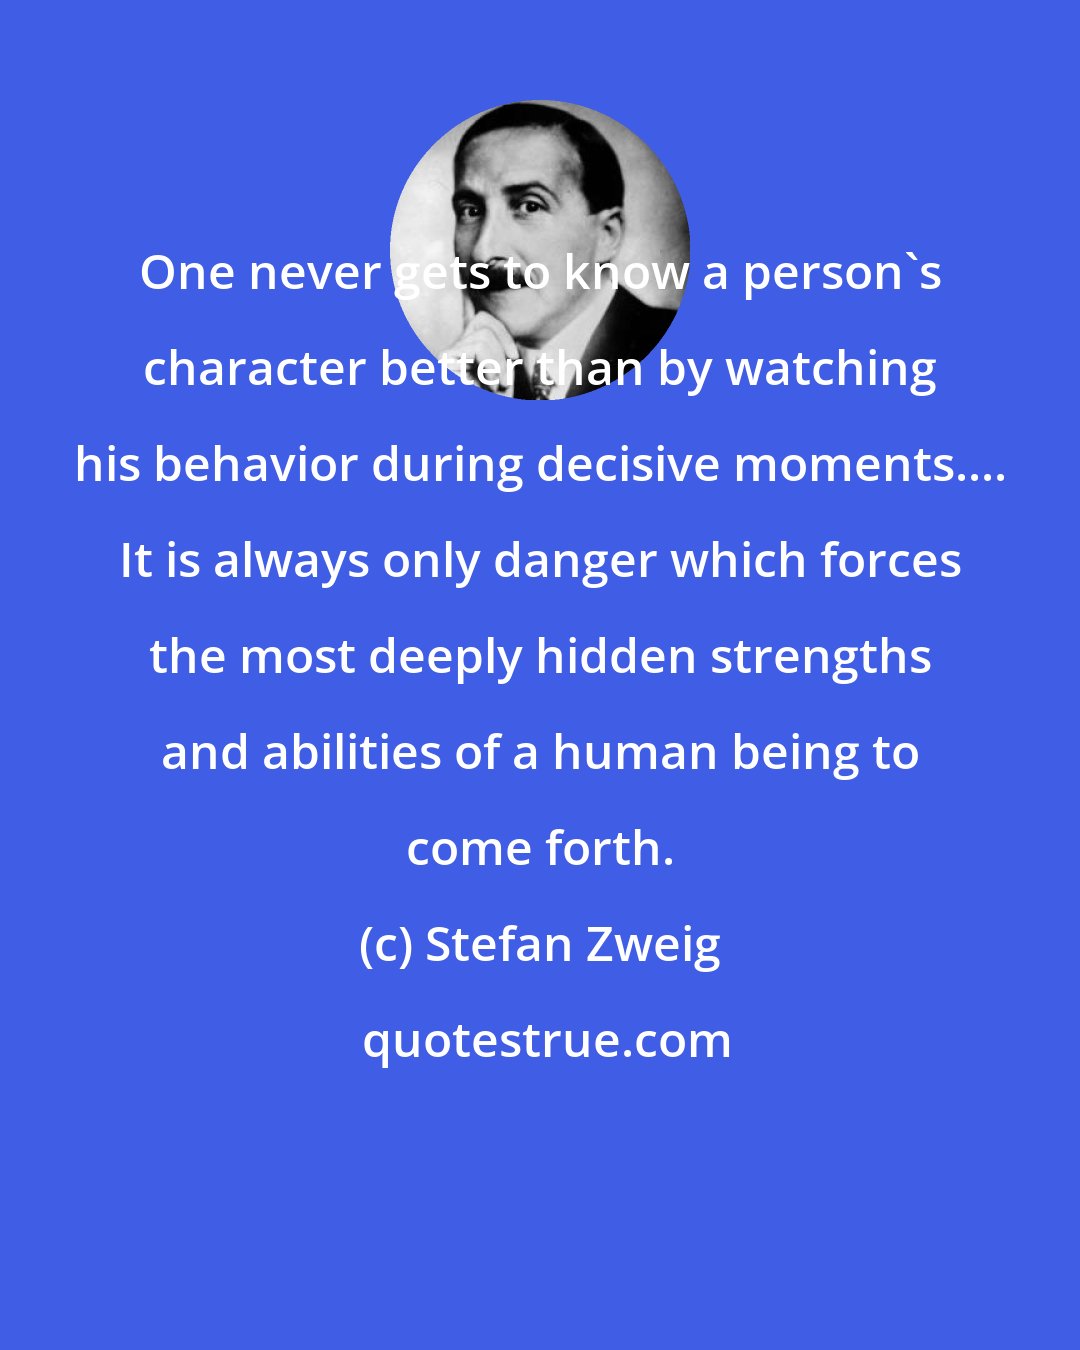 Stefan Zweig: One never gets to know a person's character better than by watching his behavior during decisive moments.... It is always only danger which forces the most deeply hidden strengths and abilities of a human being to come forth.